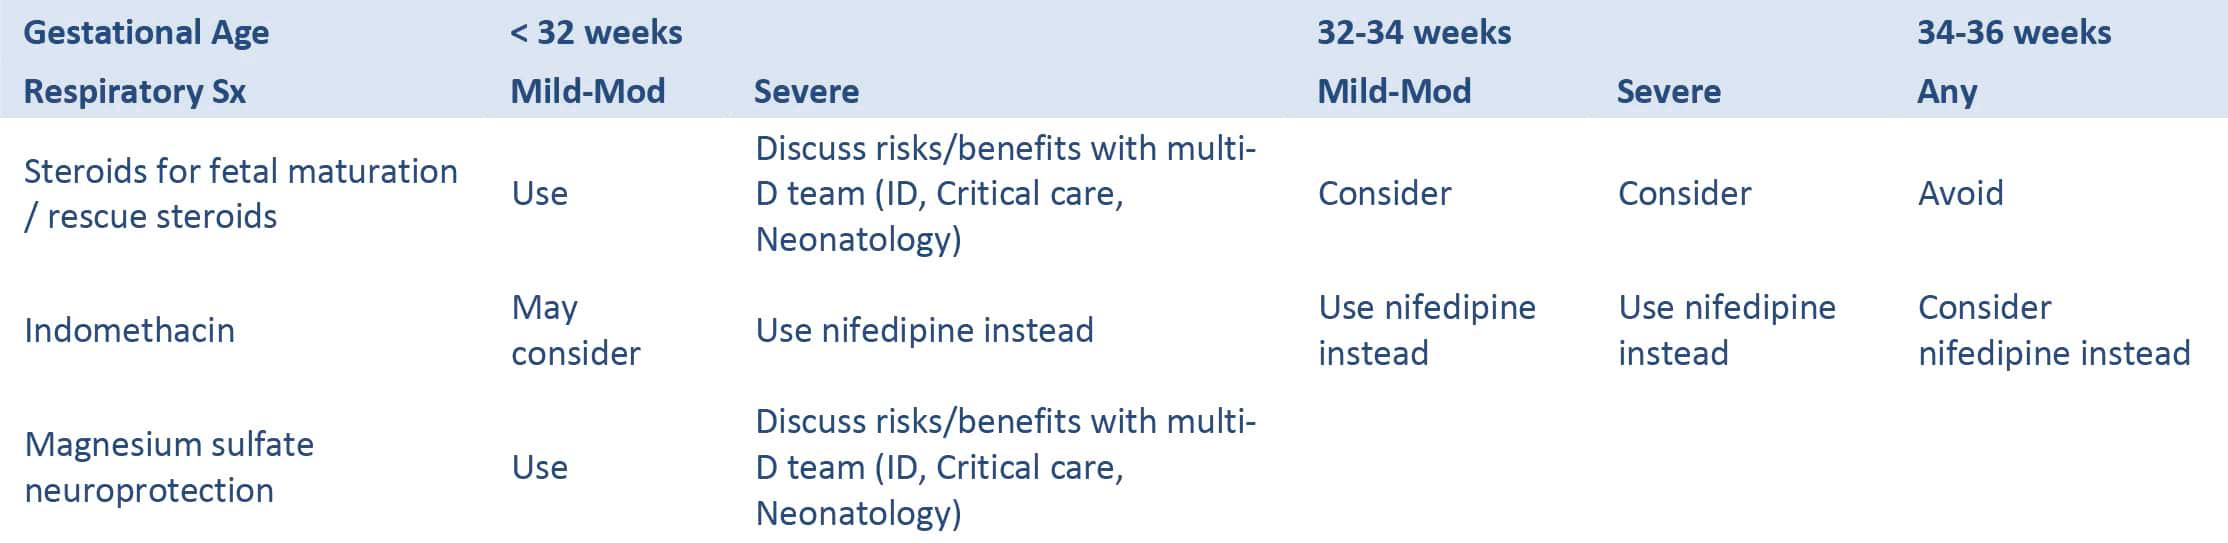 Use of Common Obstetric Medications